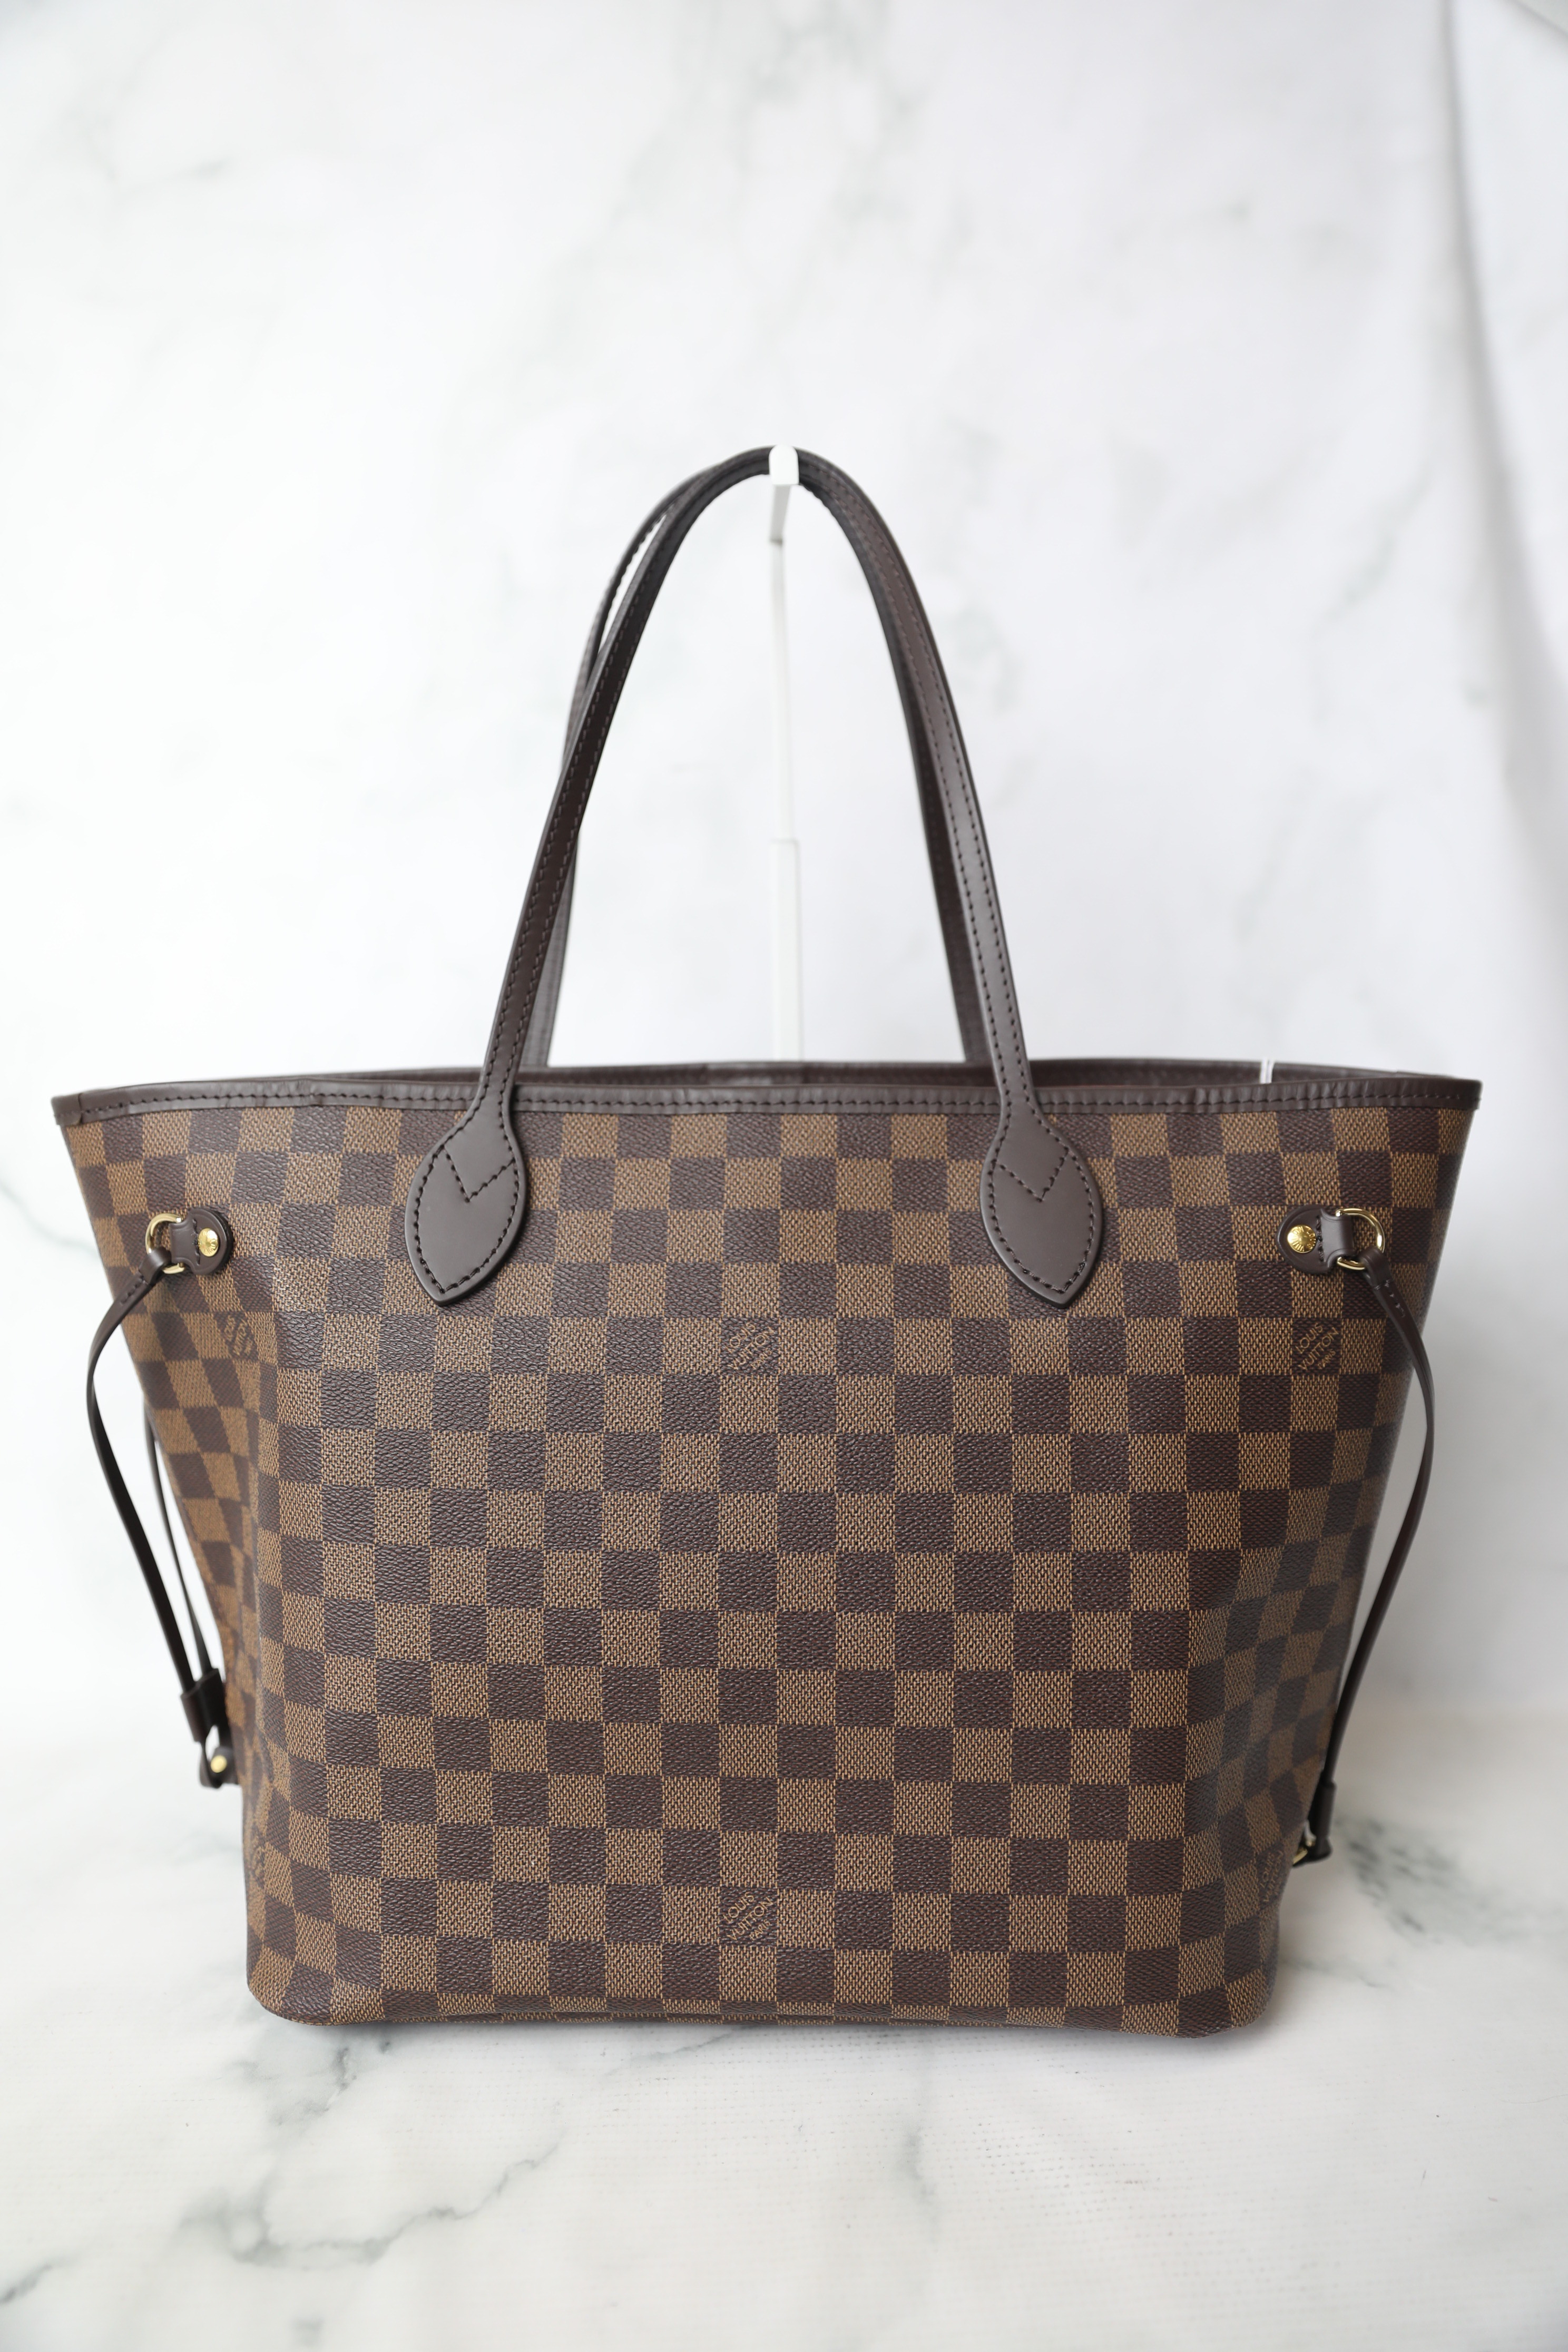 Louis Vuitton Neverful Damier Azur Tote with Pink Lining